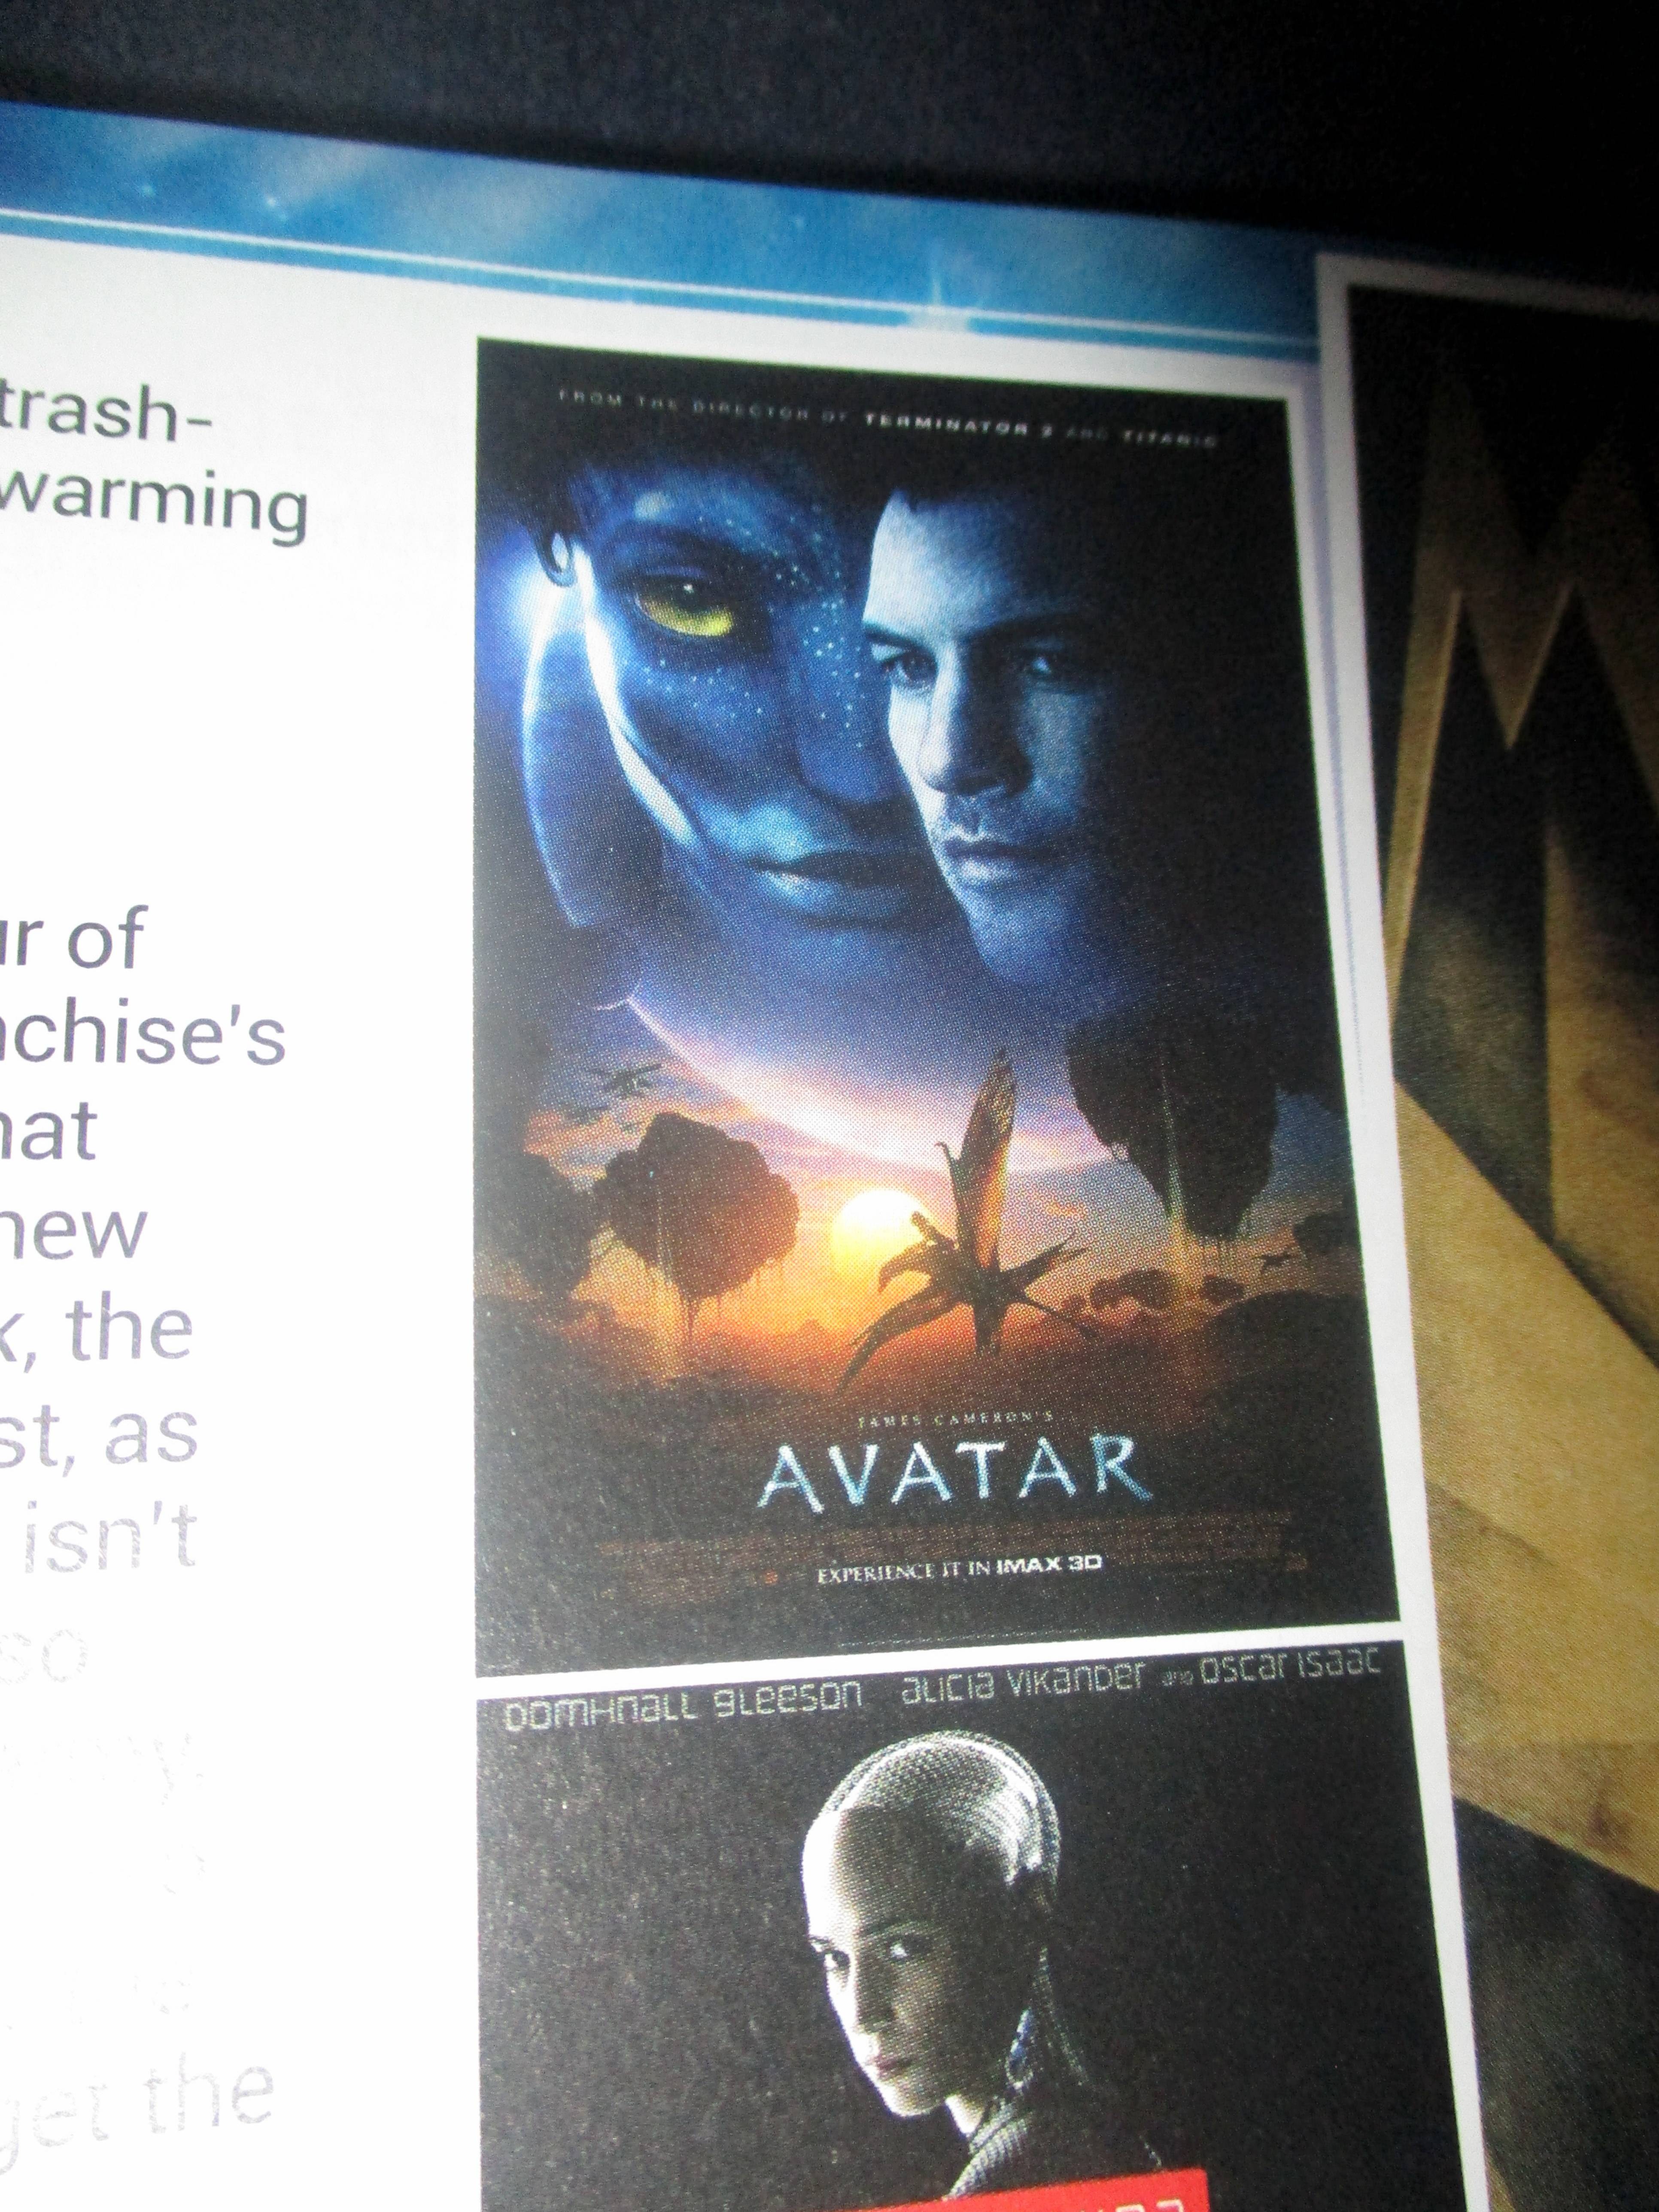 Graphic for My Mini-Review of Avatar in The Top 100 Sci-Fi Films of All Time (and Space) in Starburst Magazine #473: The Top 100 Sci-Fi Films of All Time (and Space) Collectors? Edition